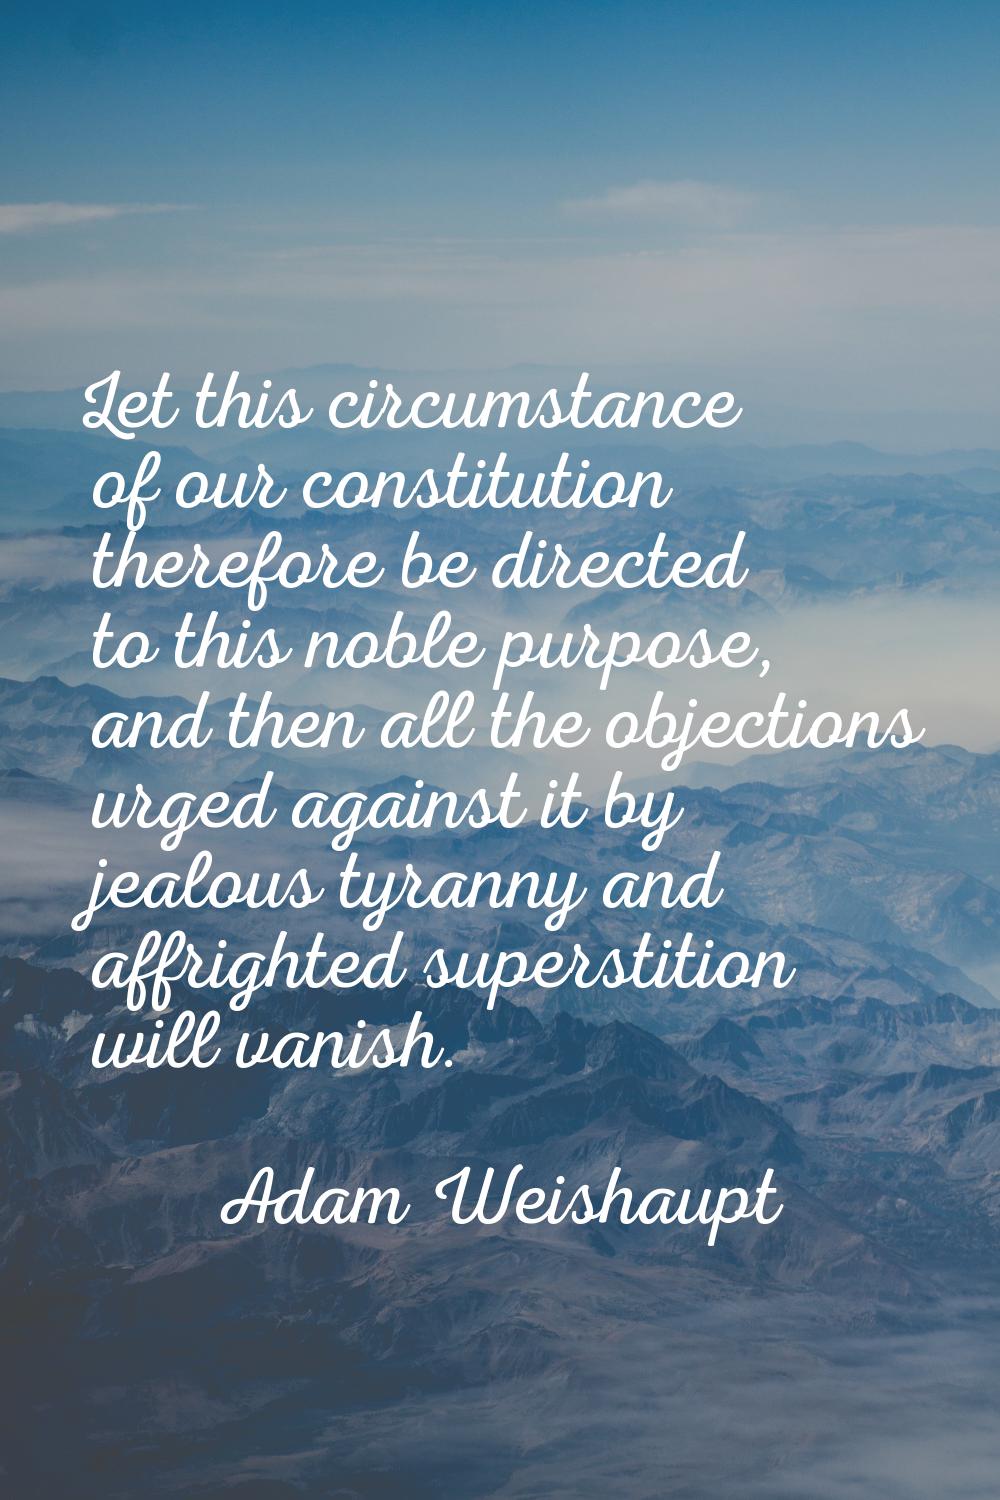 Let this circumstance of our constitution therefore be directed to this noble purpose, and then all